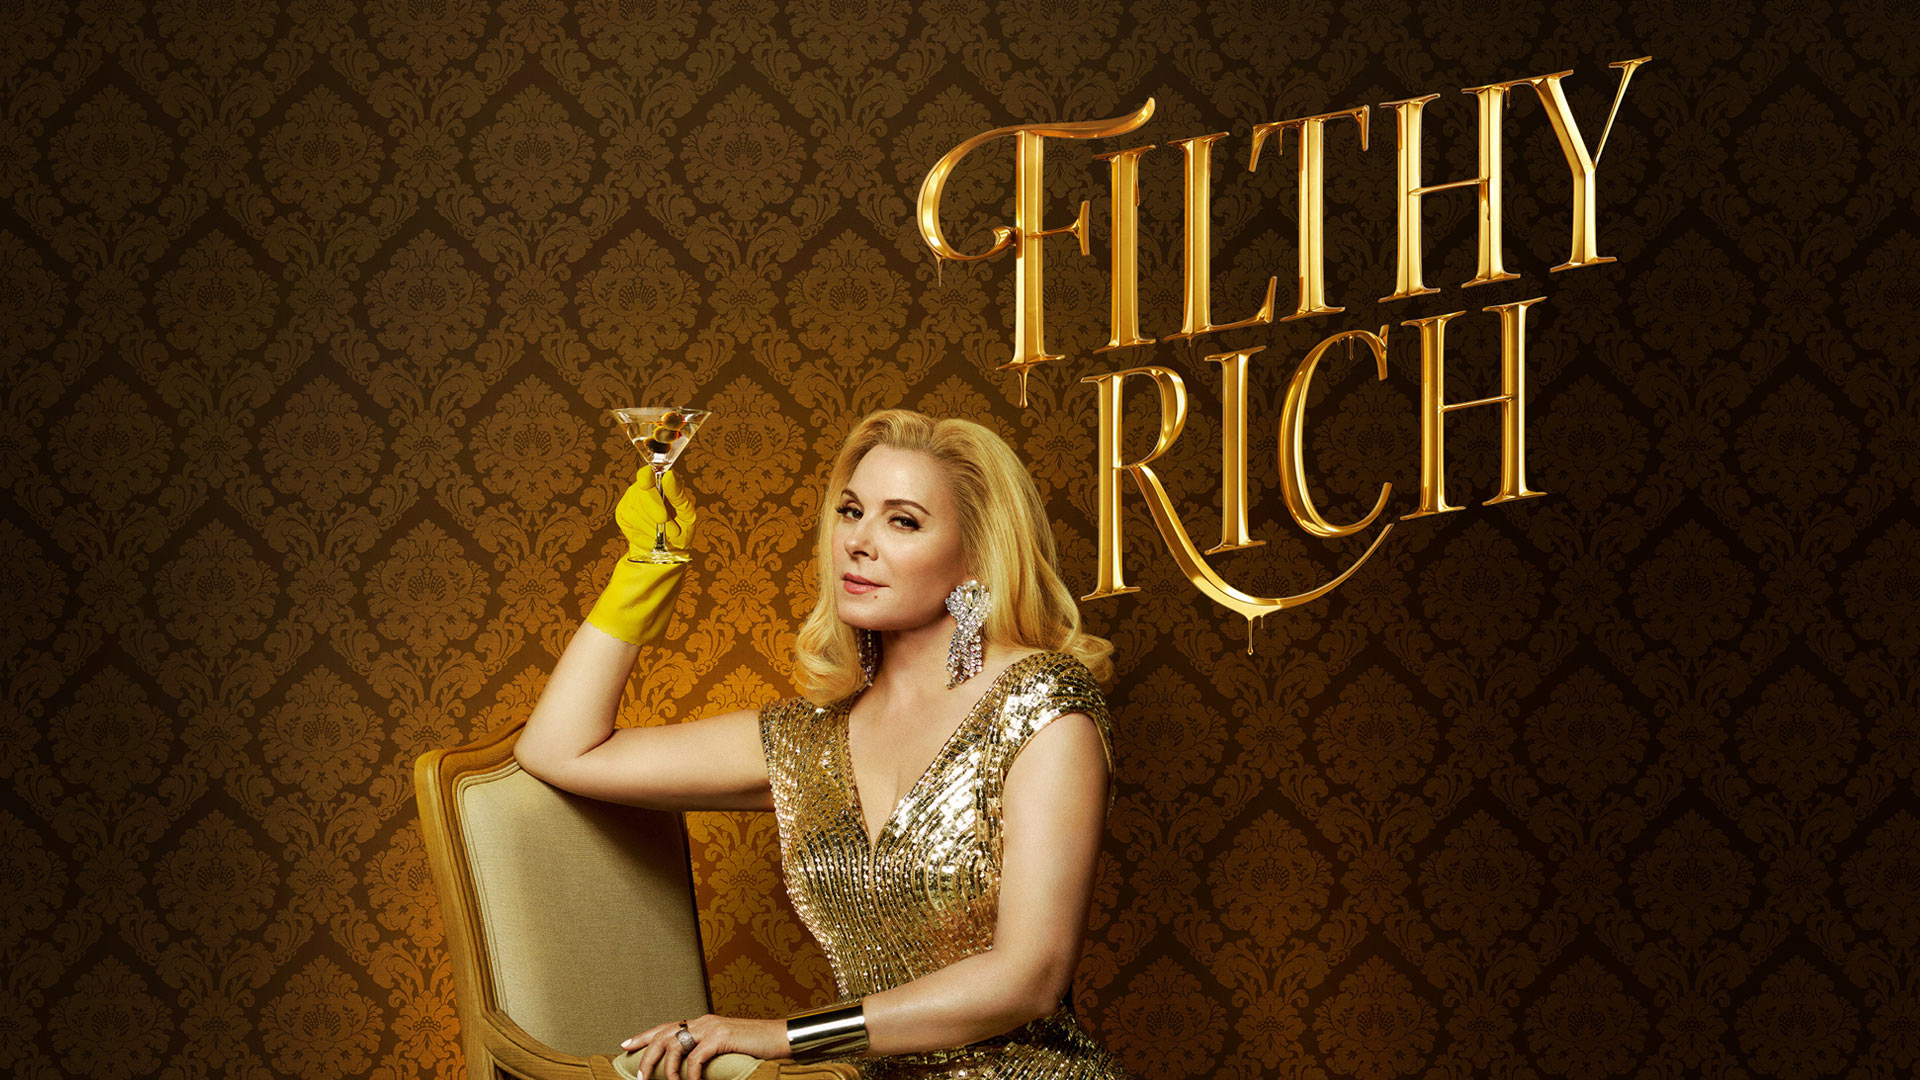 Kim Cattrall Filthy Rich Wallpapers